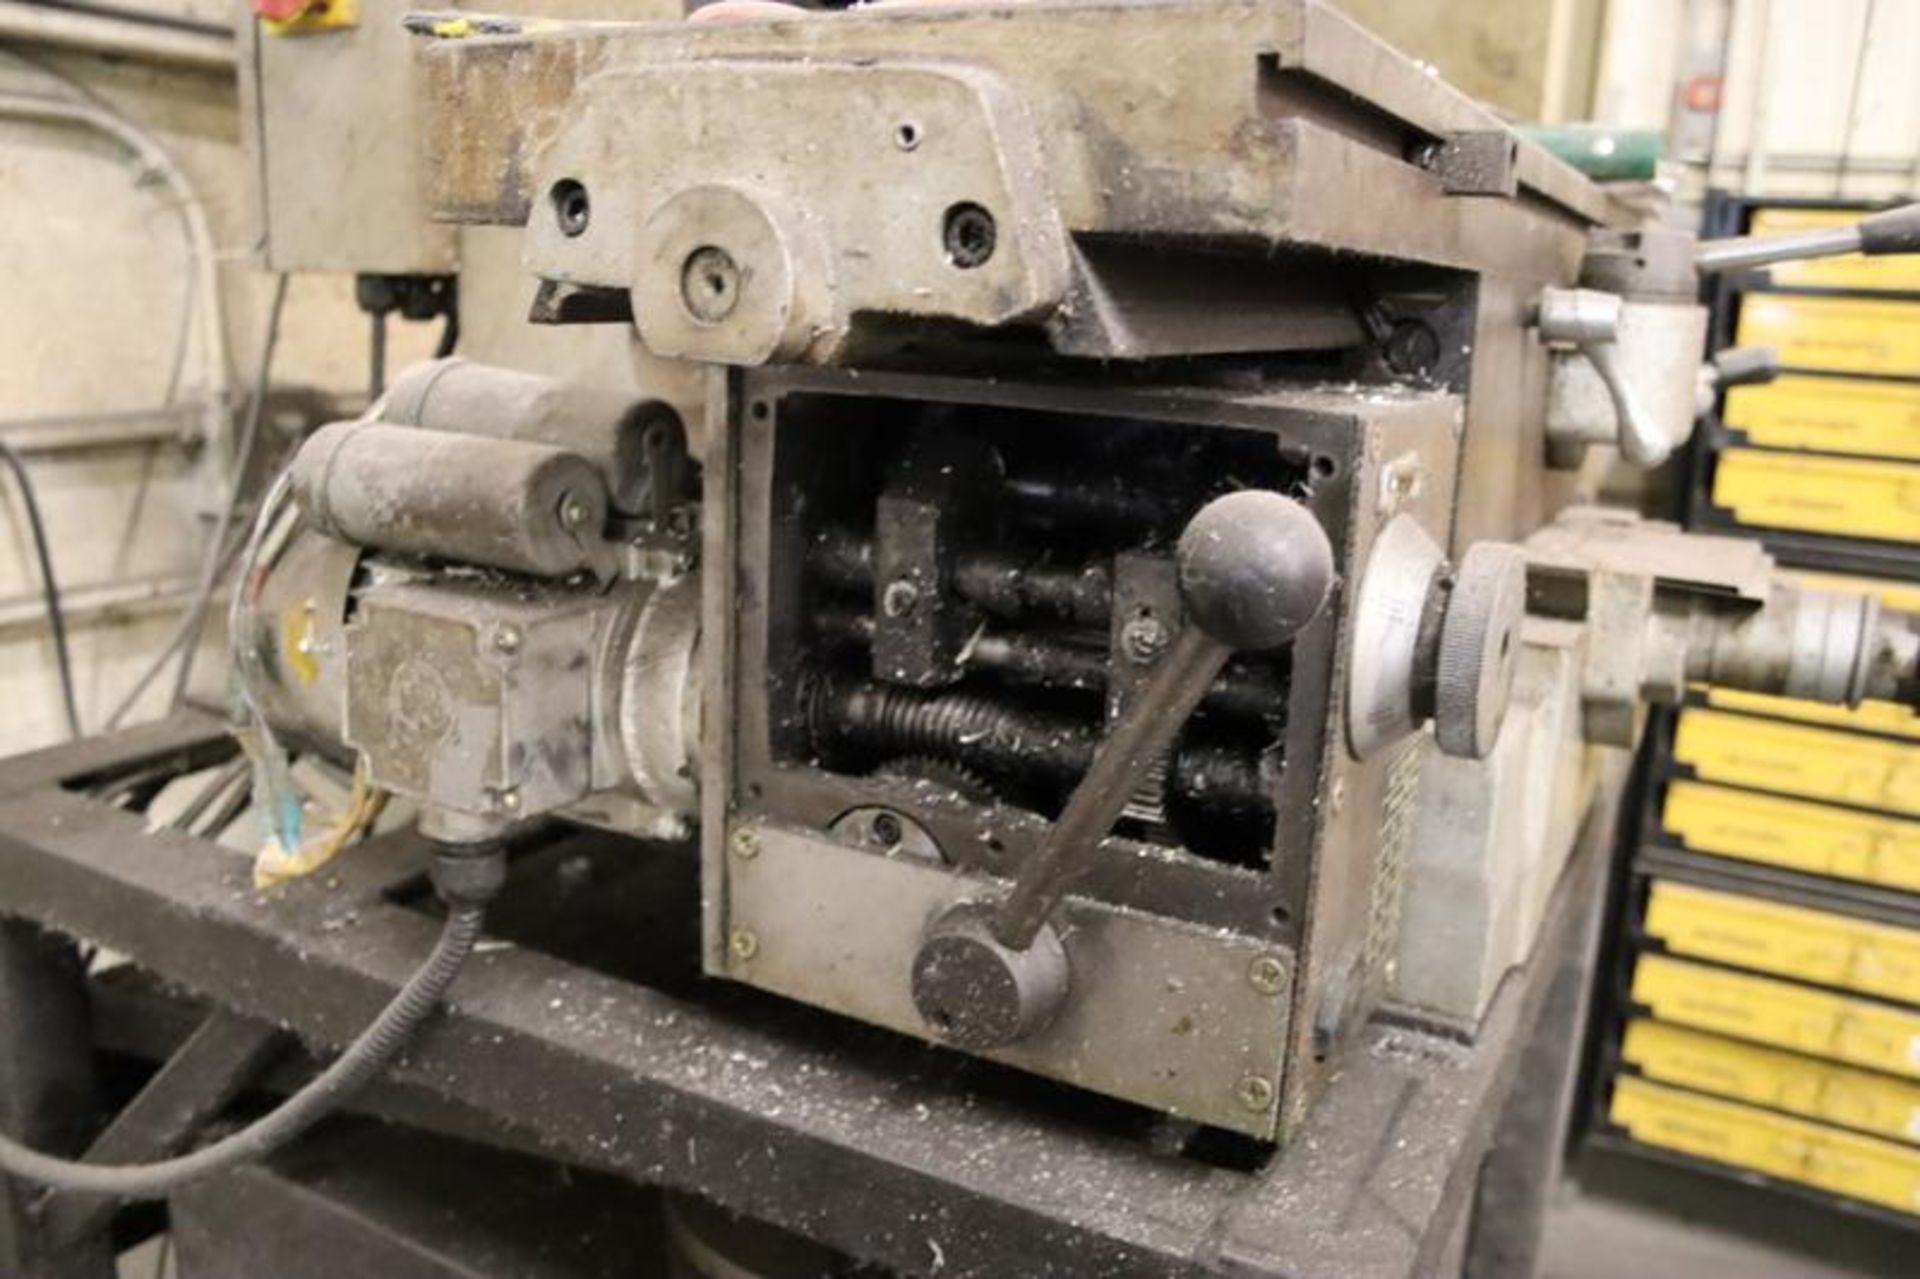 LX-329 Mill Bench Drilling and Milling Machine S/N#6048, 9"x31" Table - Image 3 of 3